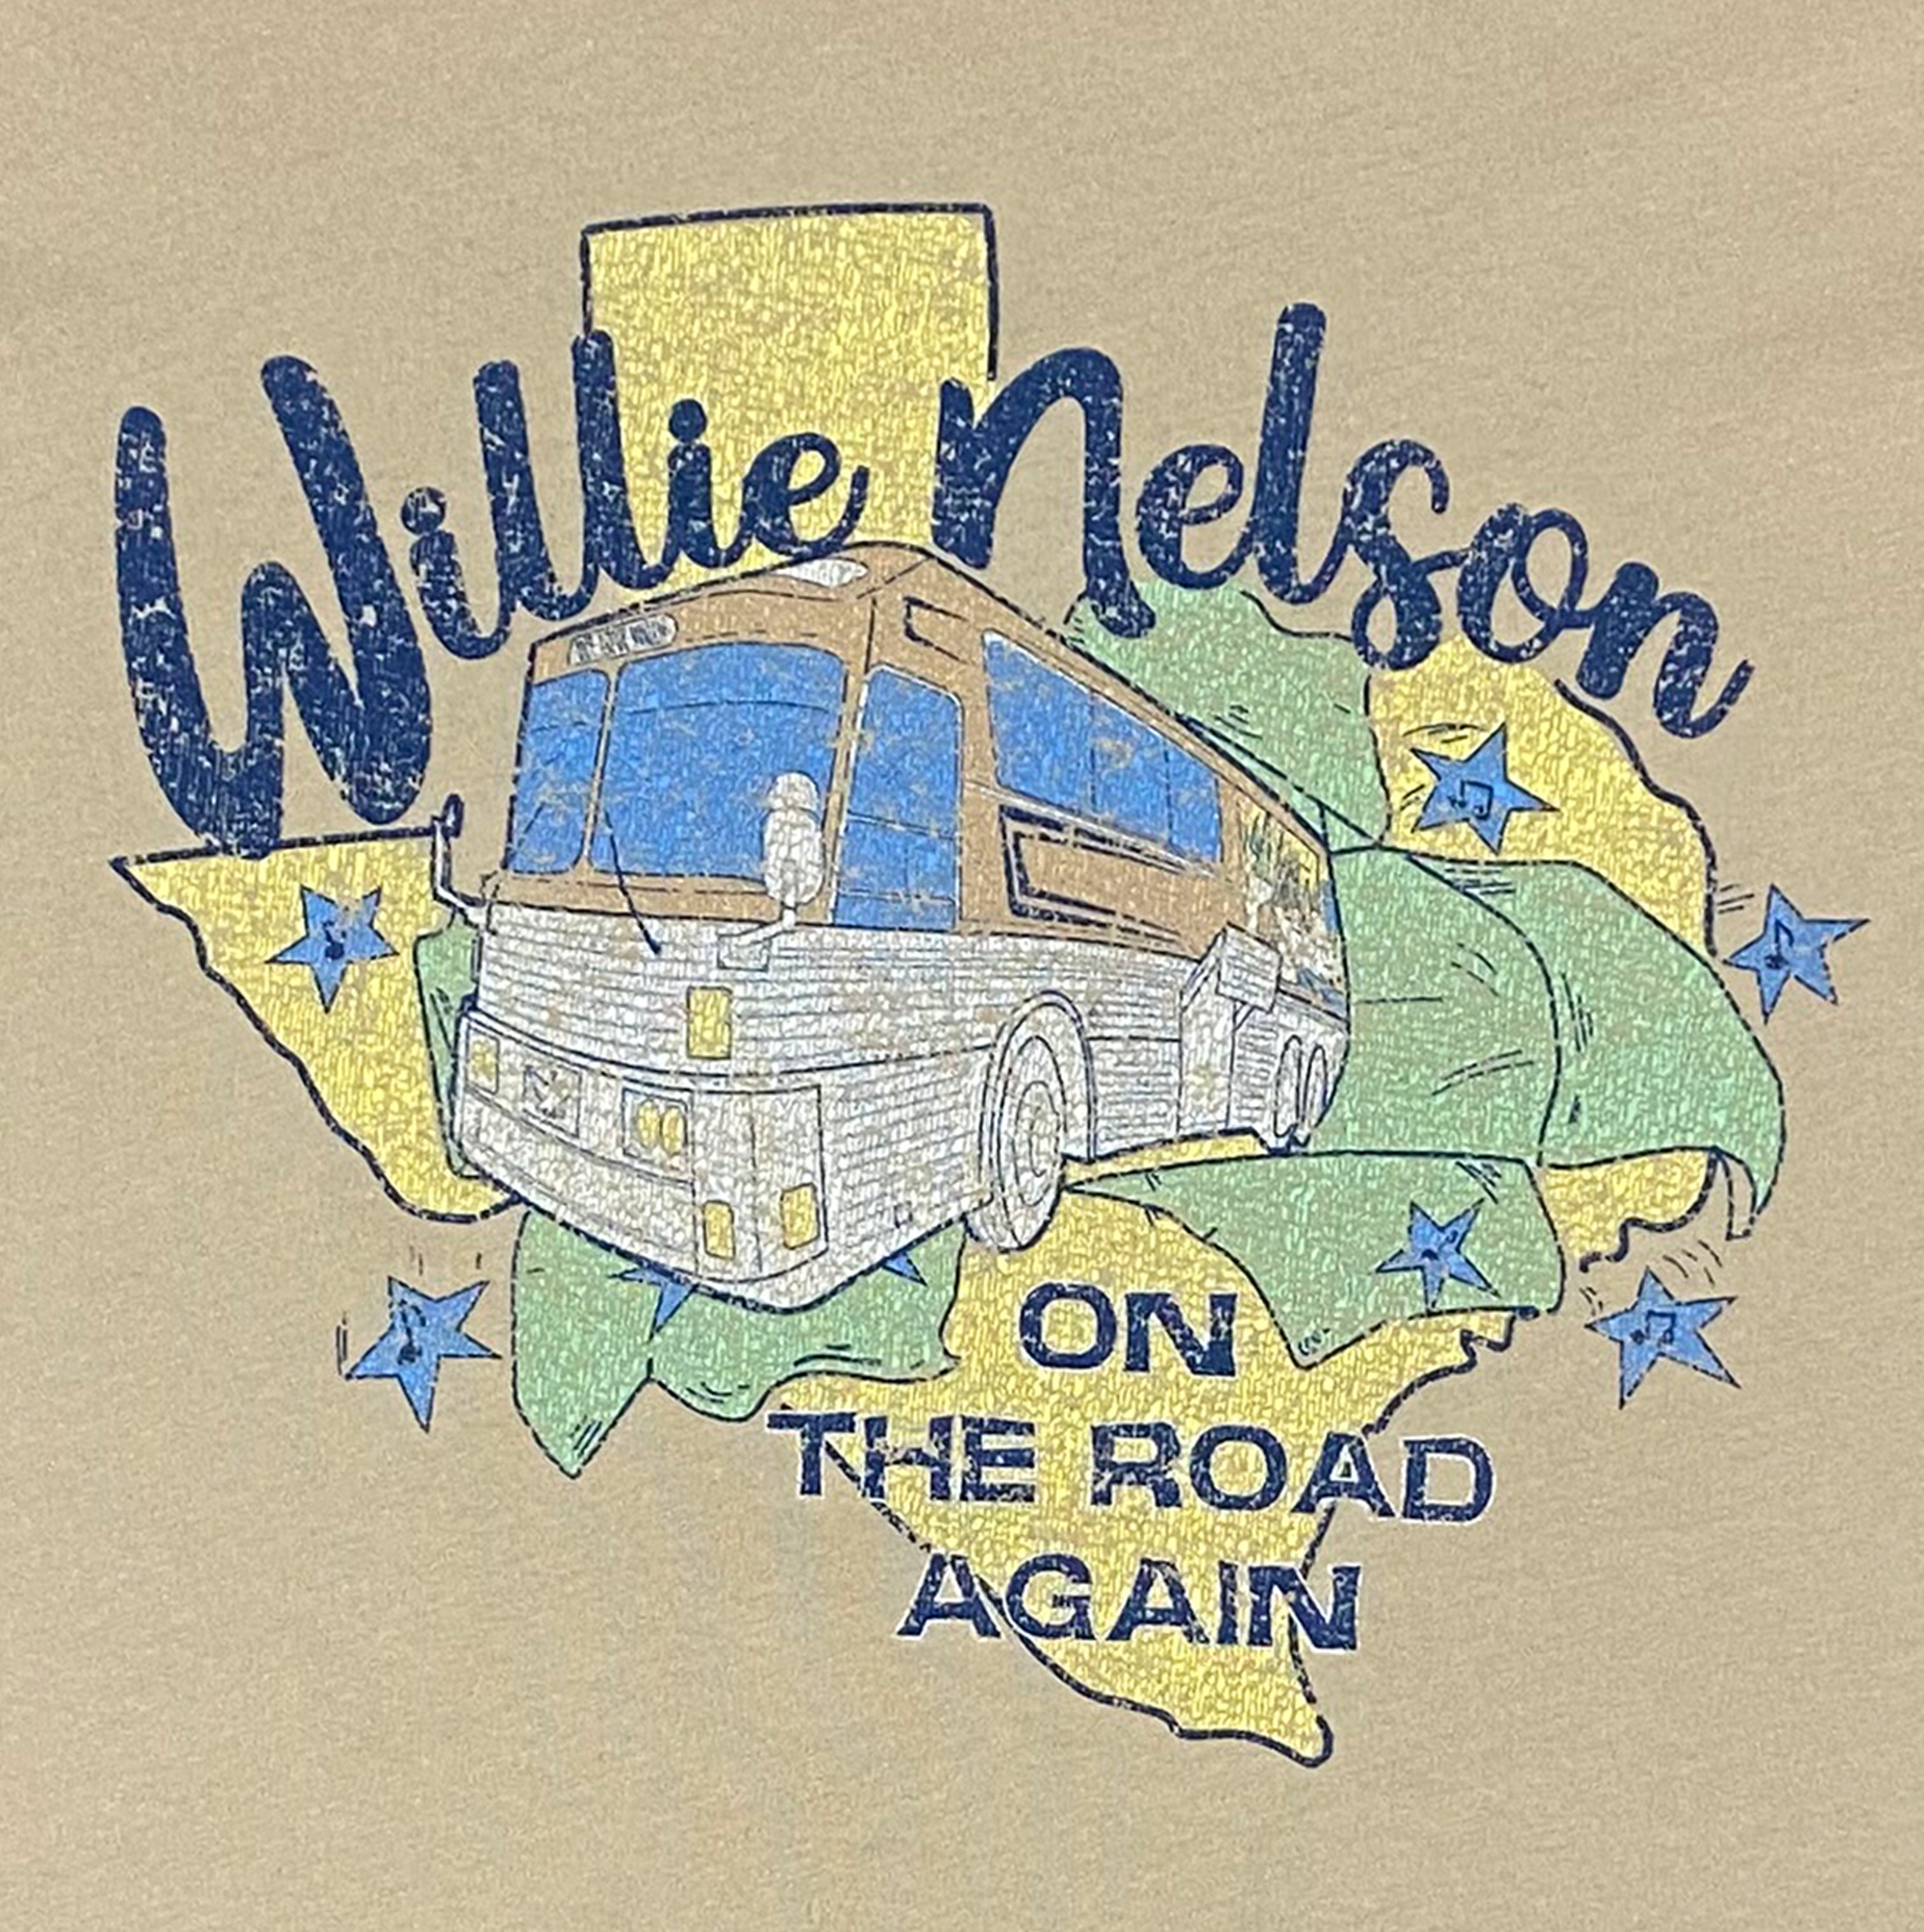 Willie Nelson On The Road Unisex Tee